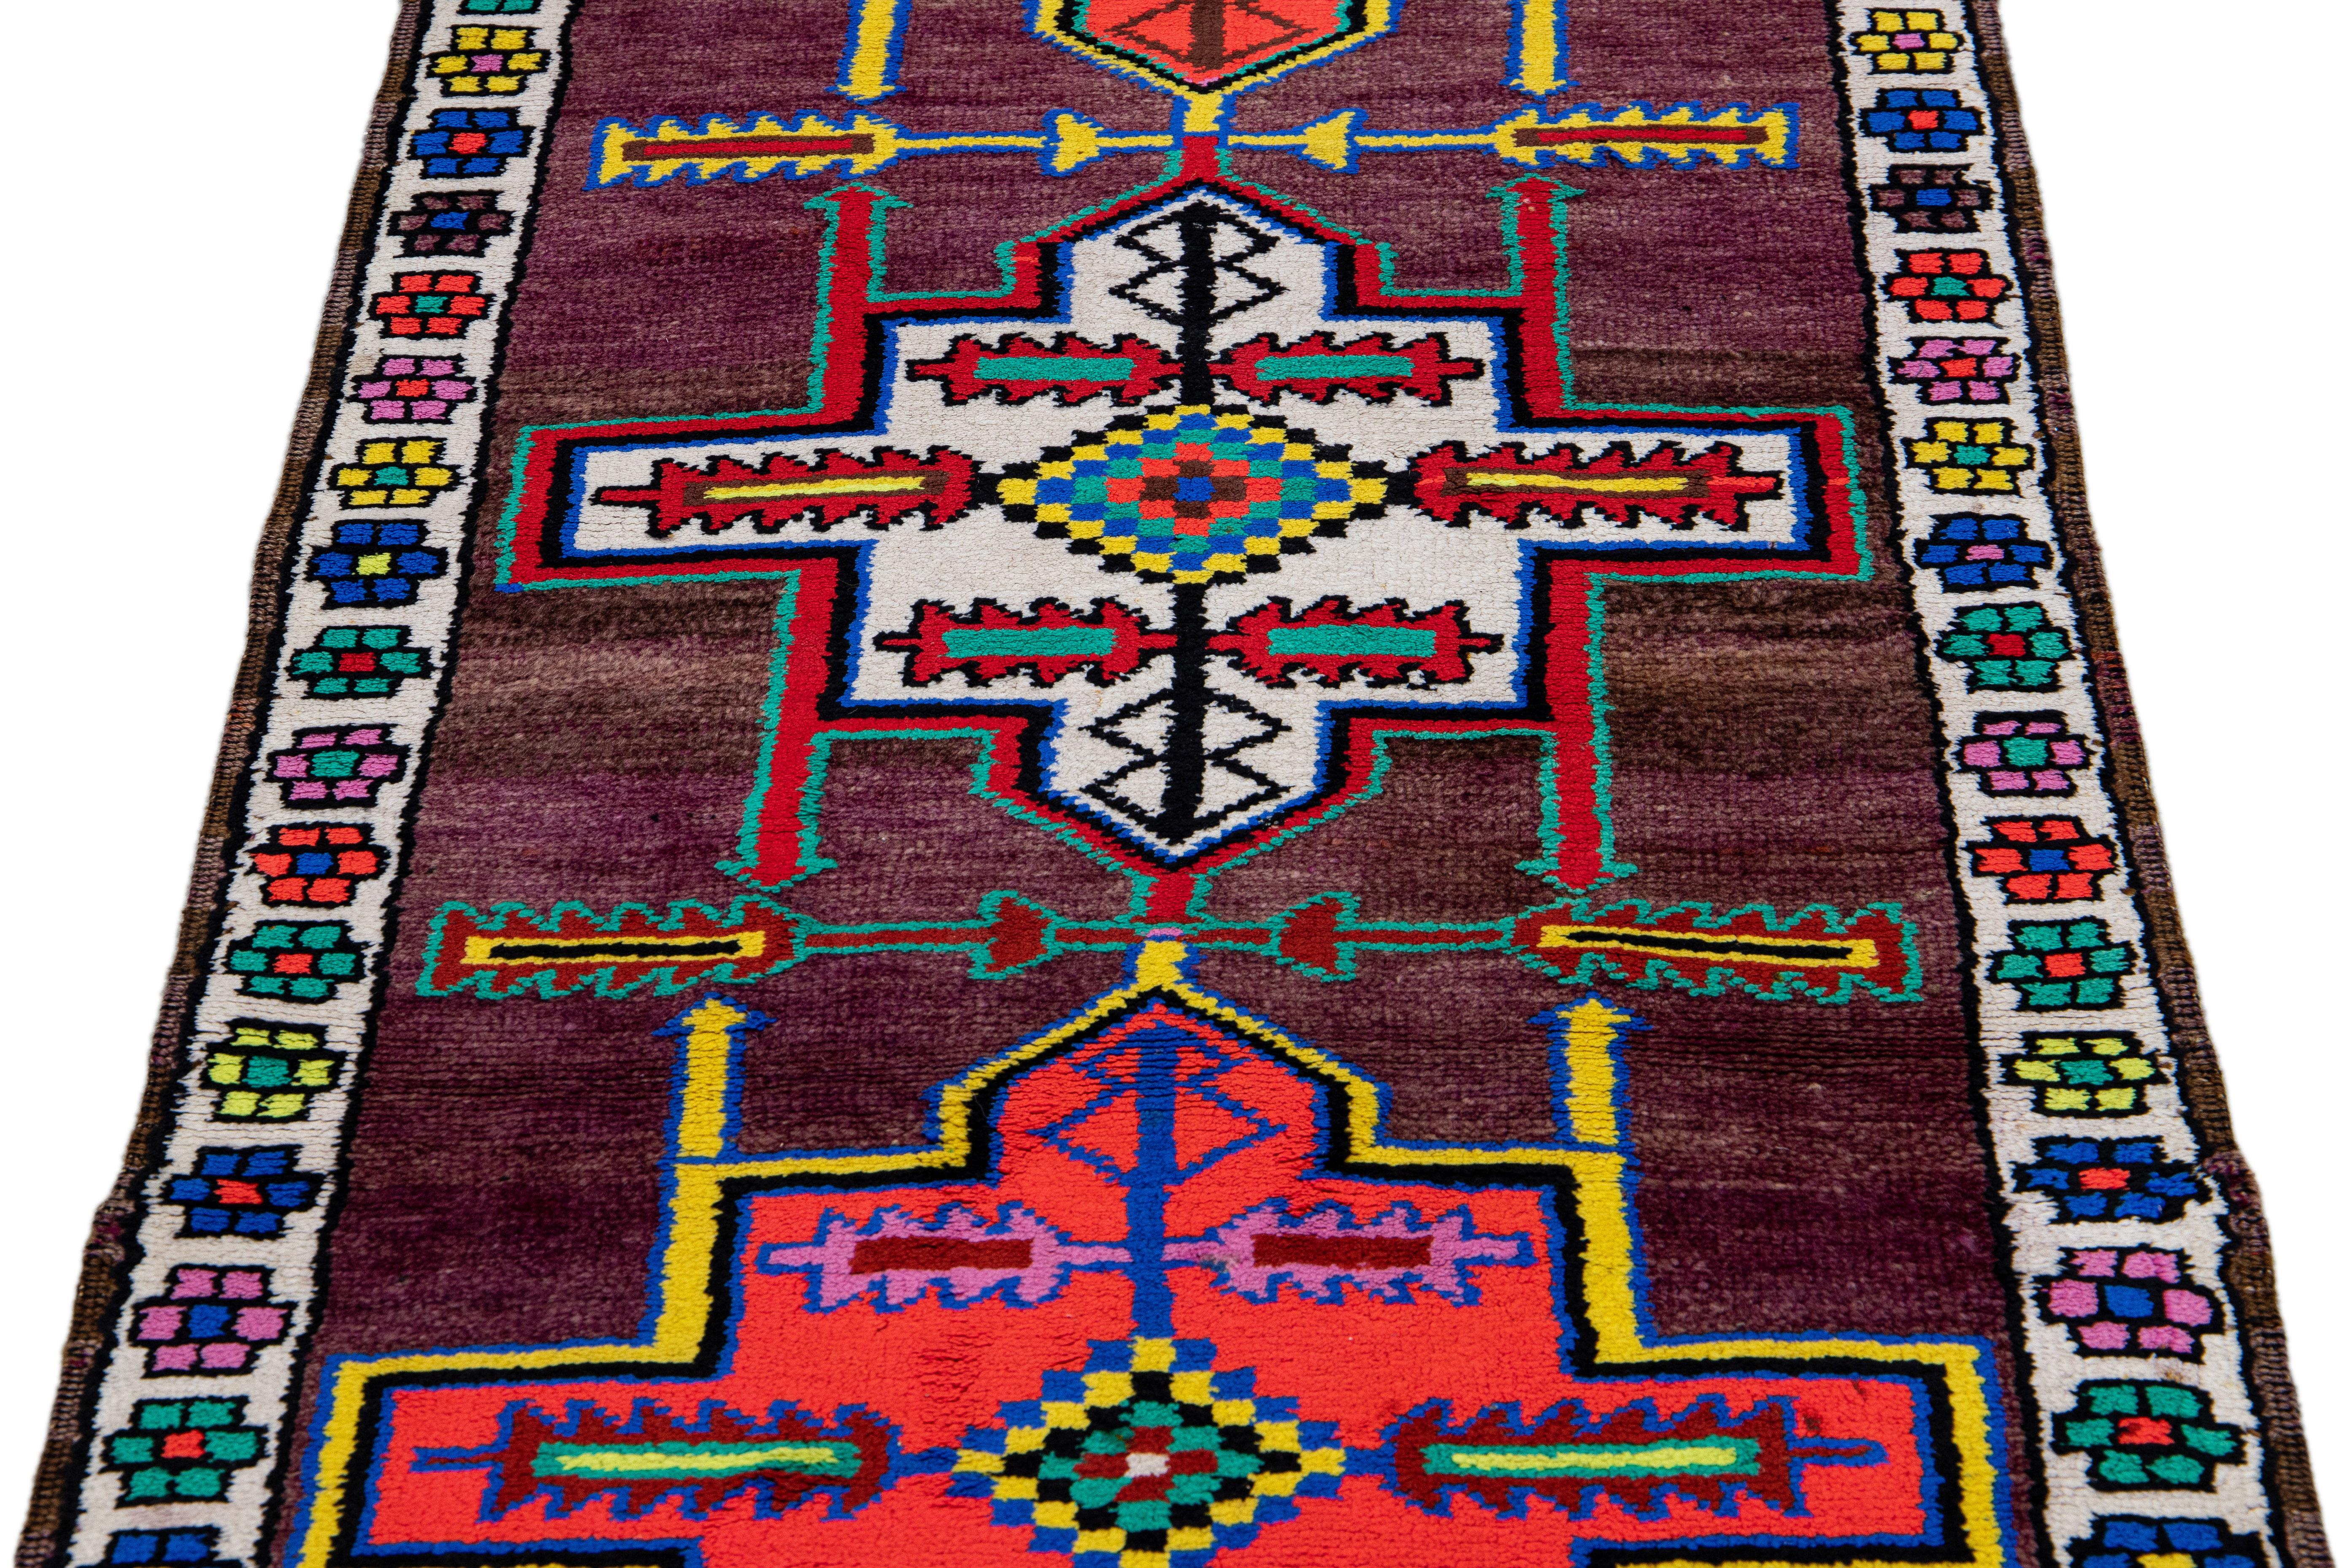 Beautiful vintage Turkish hand-knotted wool rug with a purple field. This rug has a white designed frame and multicolor accents in a gorgeous all-over geometric tribal design.

This rug measures: 2'10